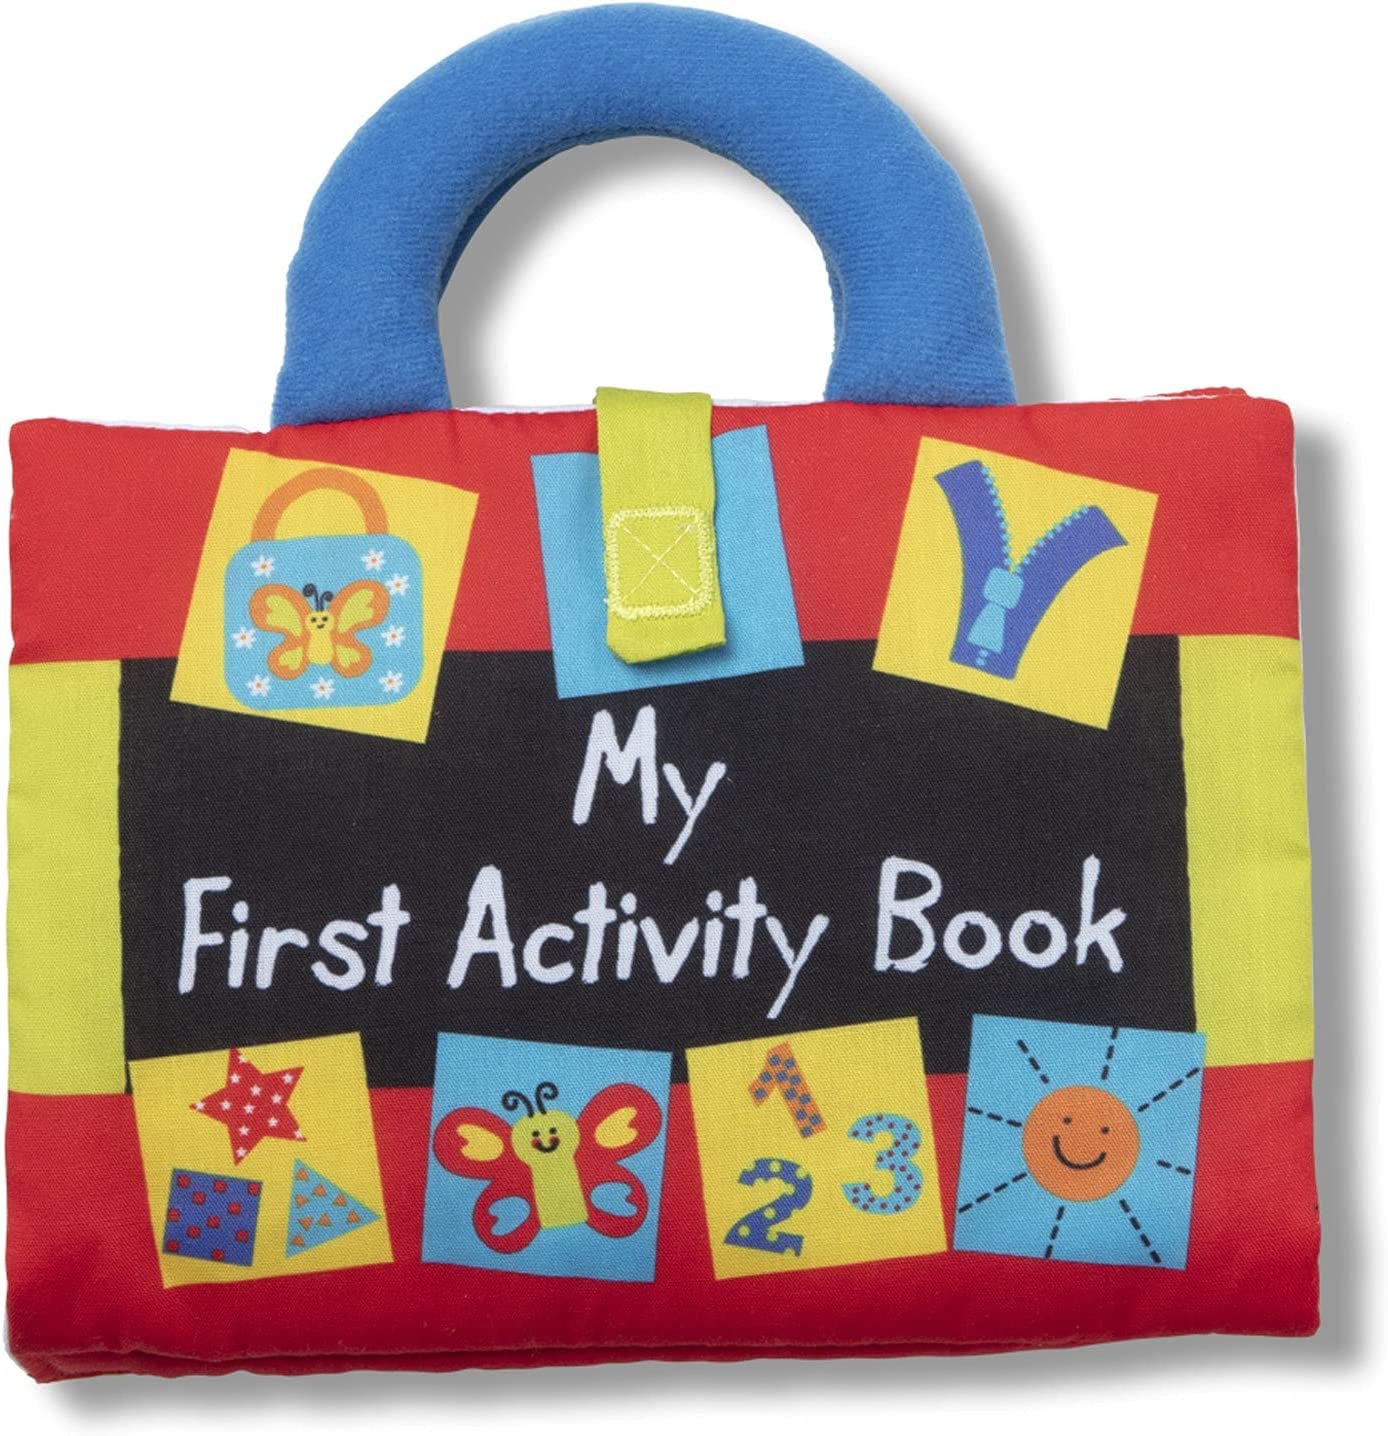 Melissa & Doug K’S Kids My First Activity Book 8-Page Soft Book for Babies and Toddlers